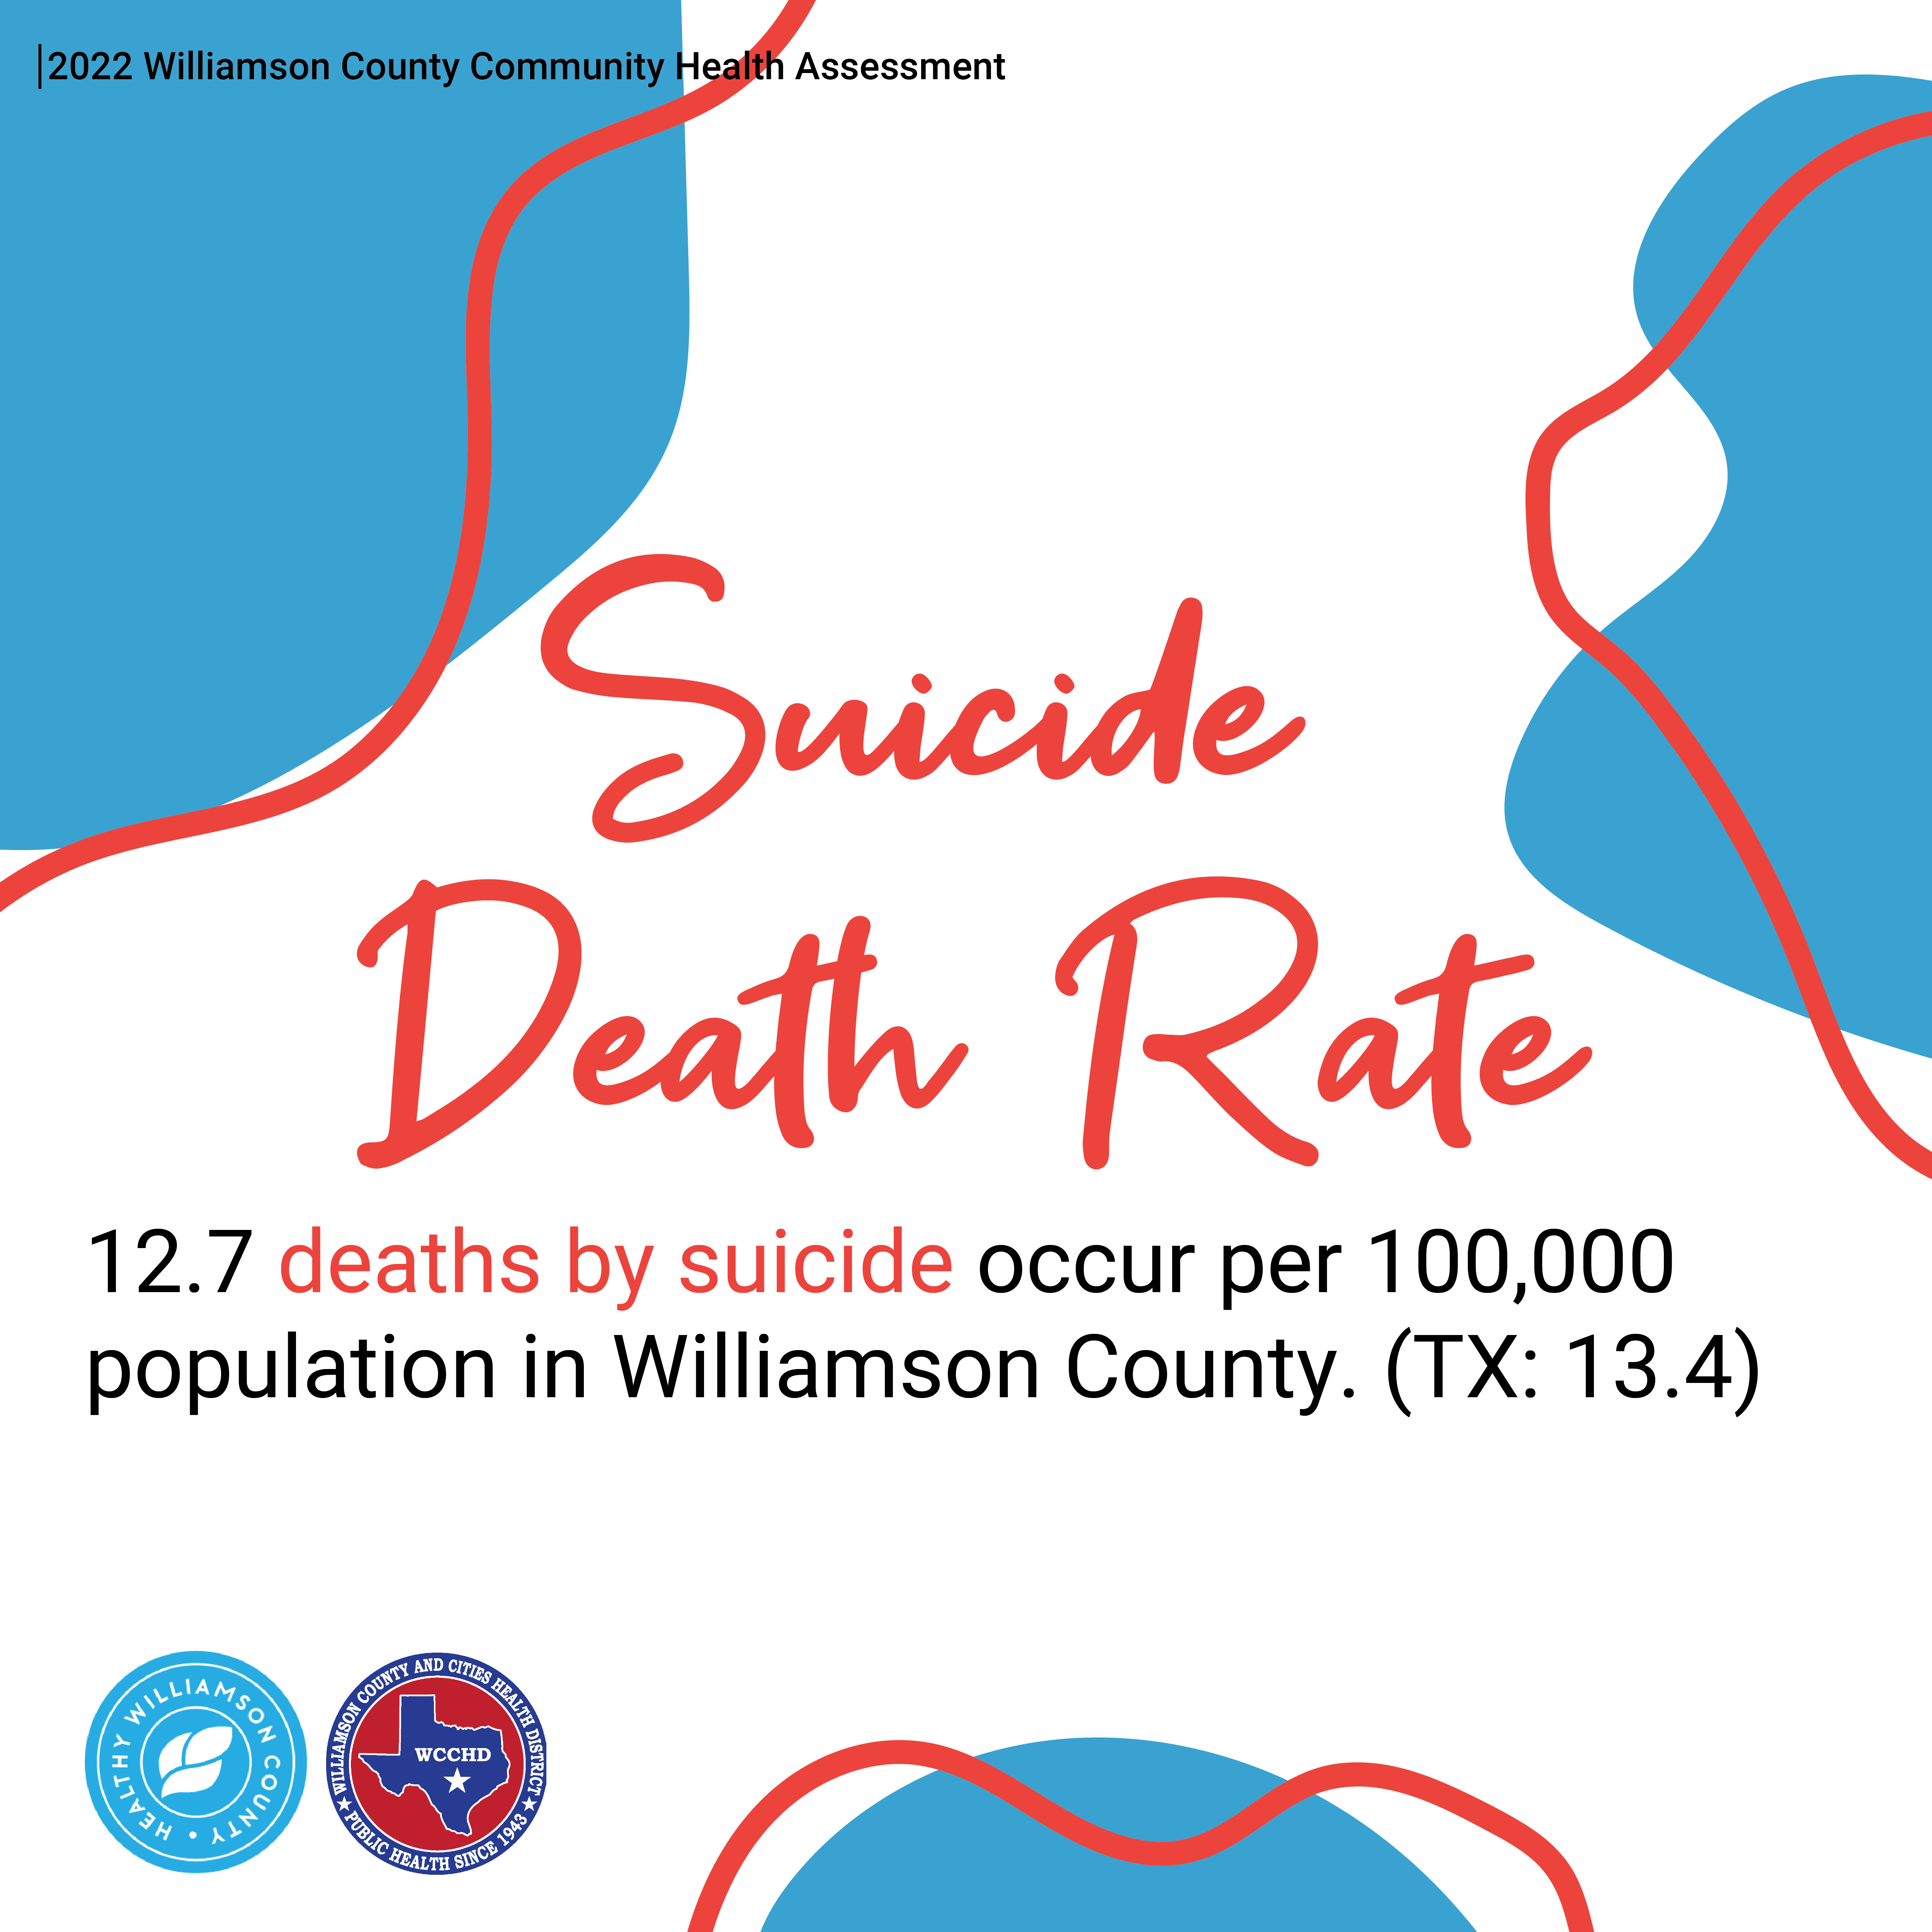 2022 Williamson County Community Health Assessment. Suicide Death Rate. 12.7 deaths by suicide occur per 100,000 population in Williamson County. (TX: 13.4). In top left, top right, and lower middle of graphic, blobs and squiggly lines. Logos of Healthy Williamson County and Williamson County and Cities Health District.